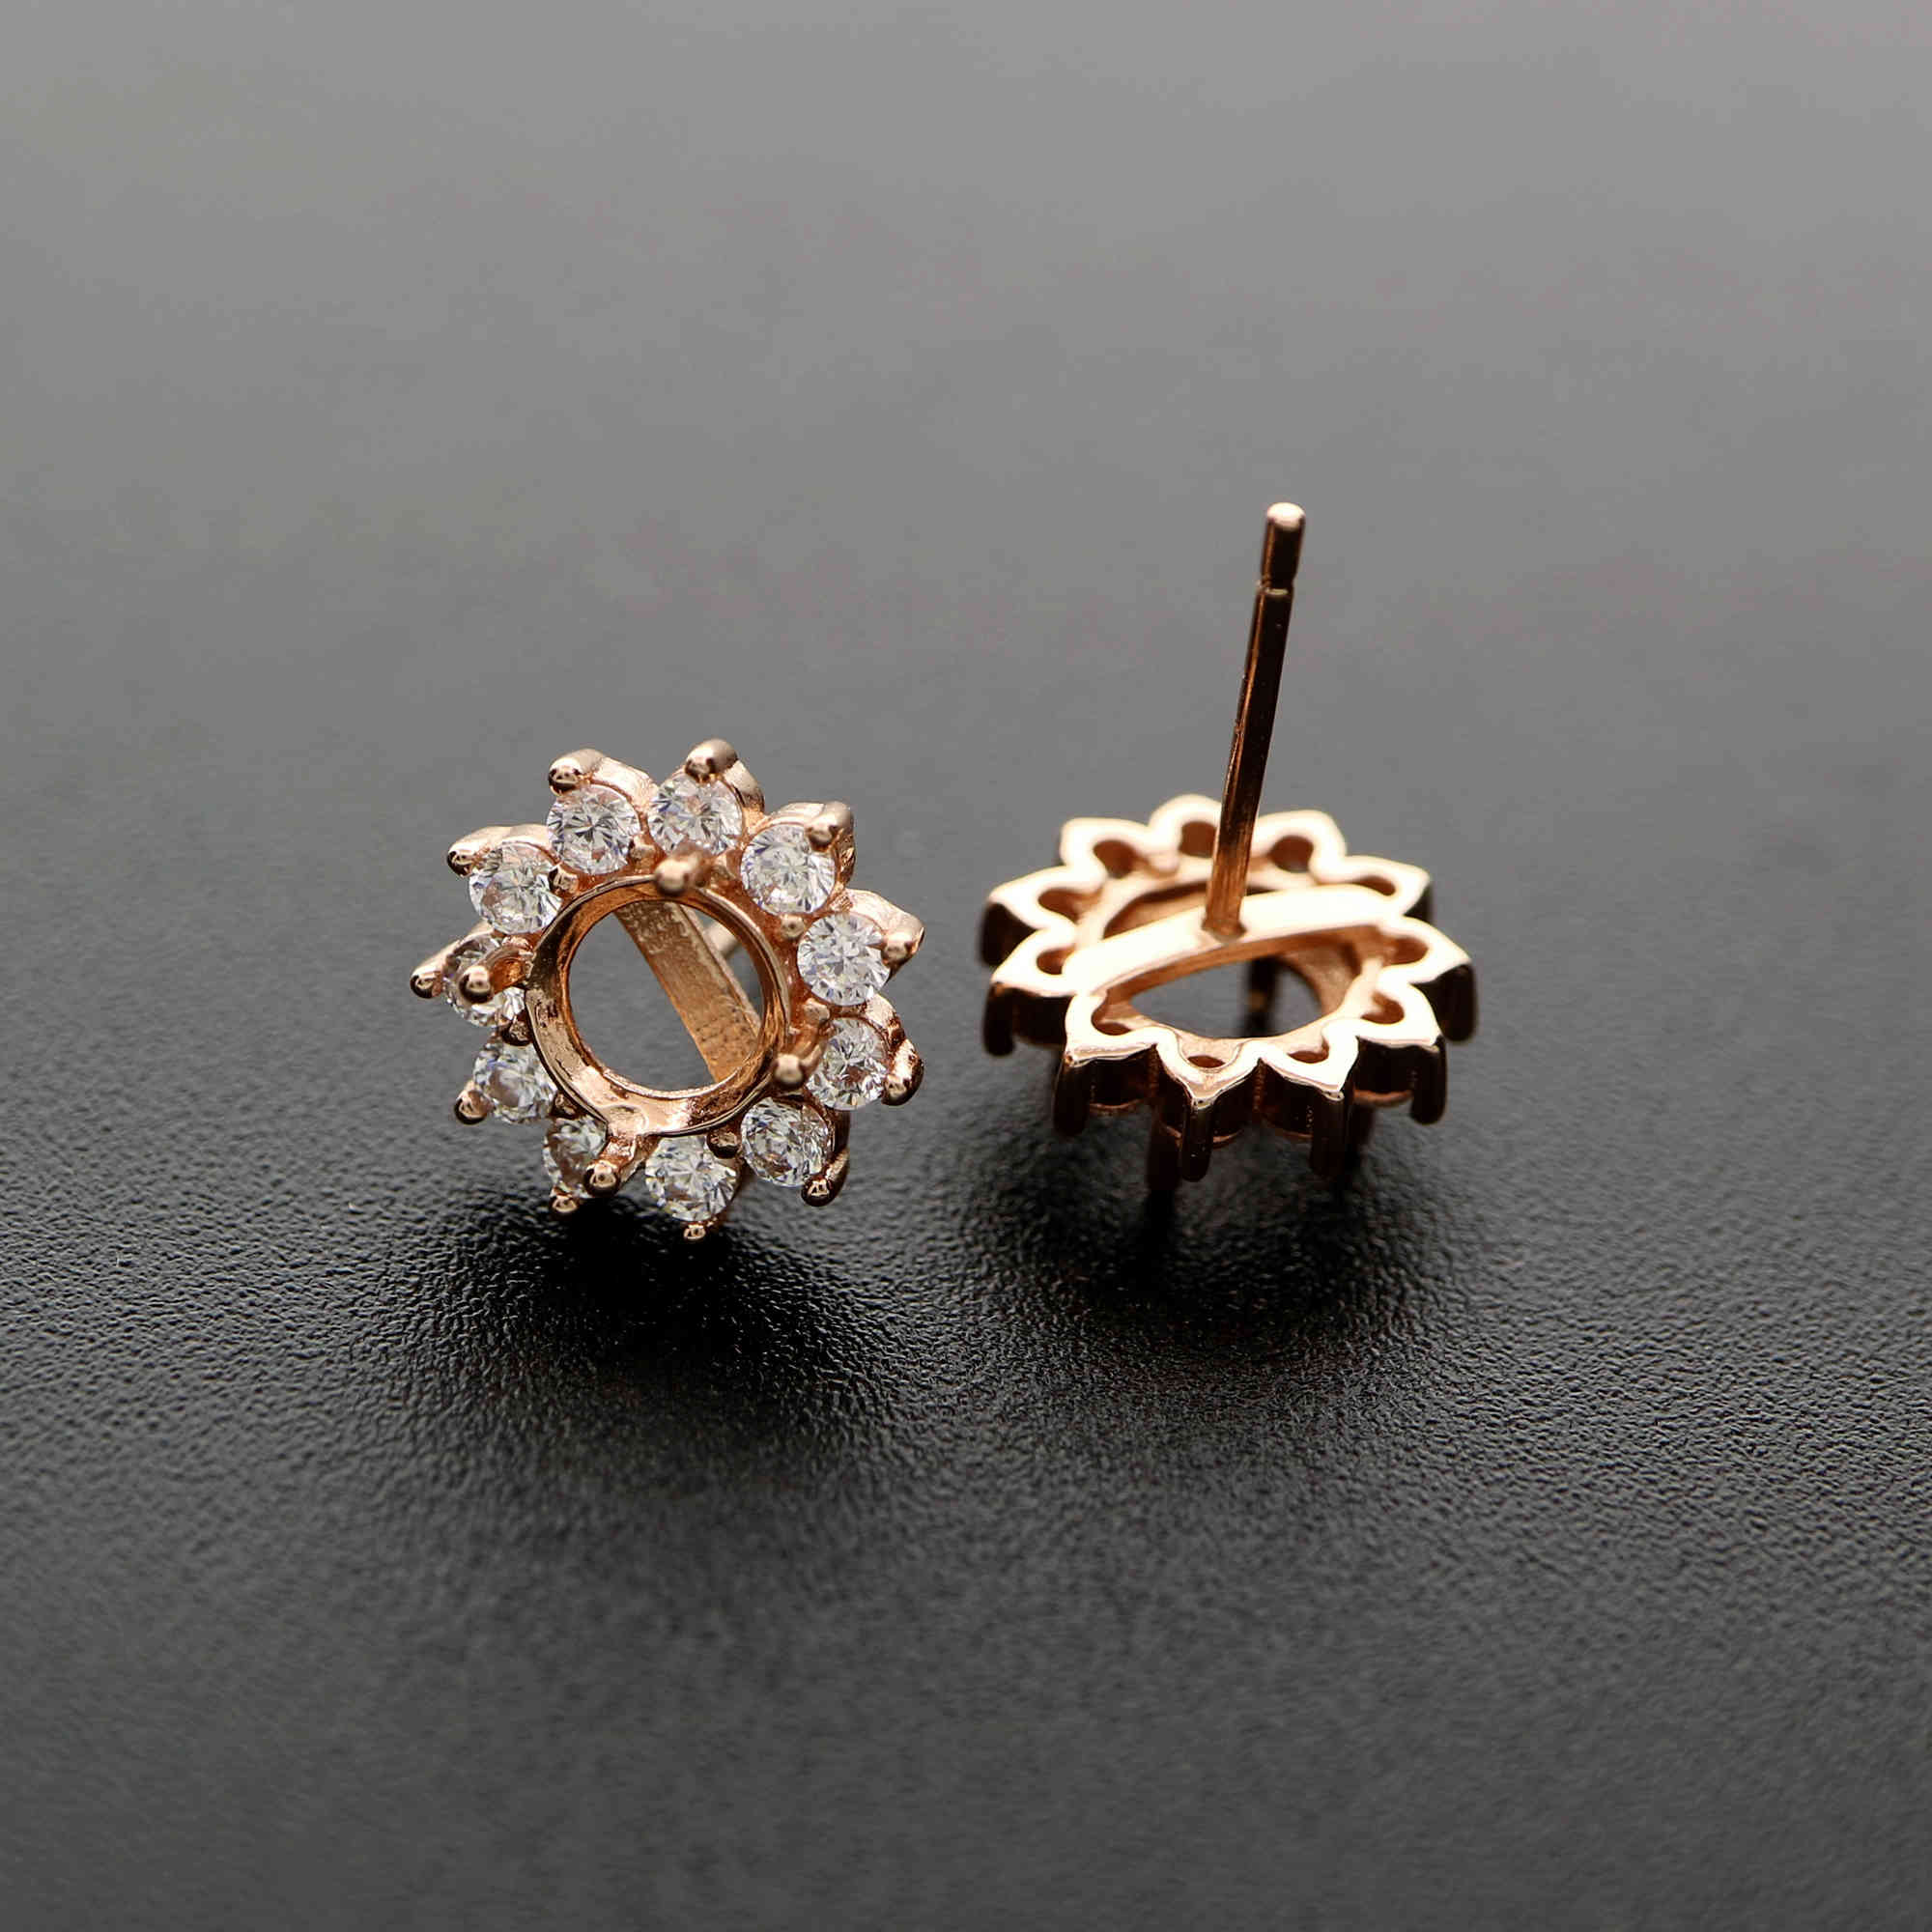 1Pair 4-10MM Round Solid 925 Sterling Silver Rose Gold Tone DIY Prong Studs Earrings Settings Bezel With Cubic Zirconia 1706015 - Click Image to Close